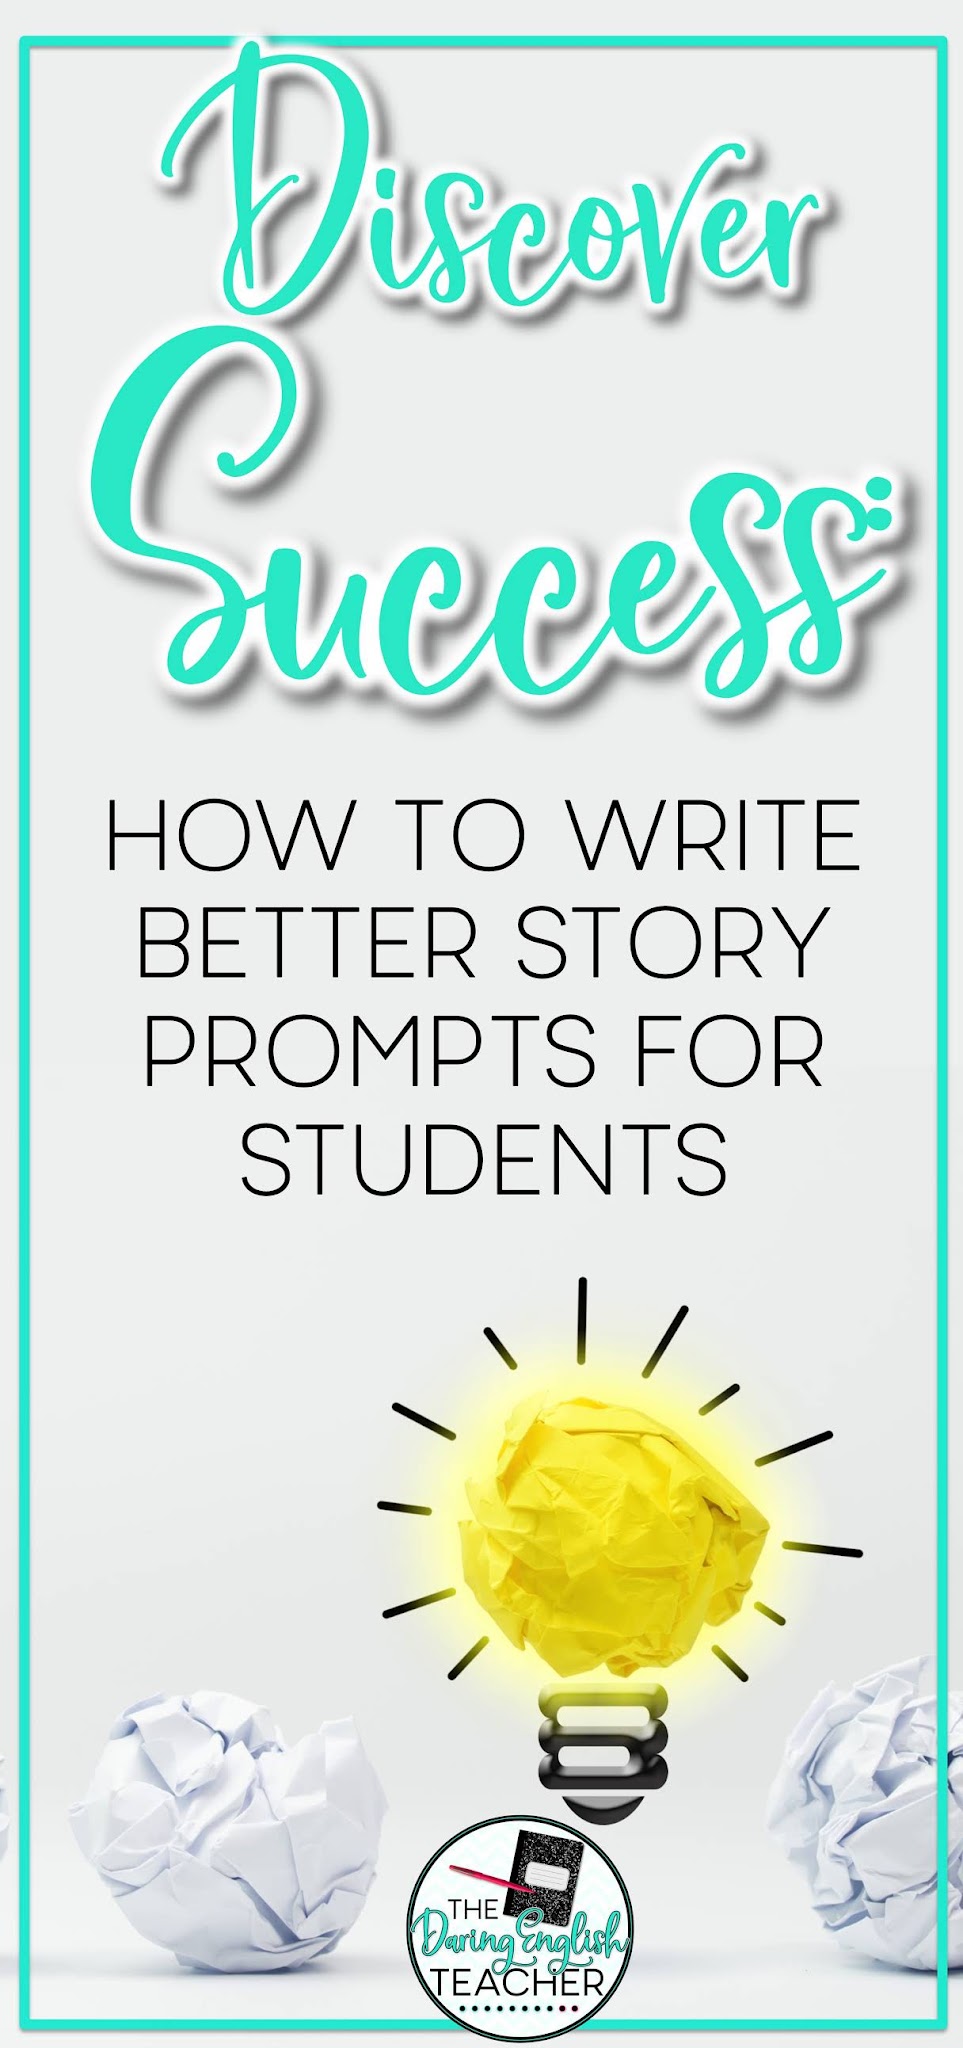 Discover Success: How to Write Better Story Prompts for Students